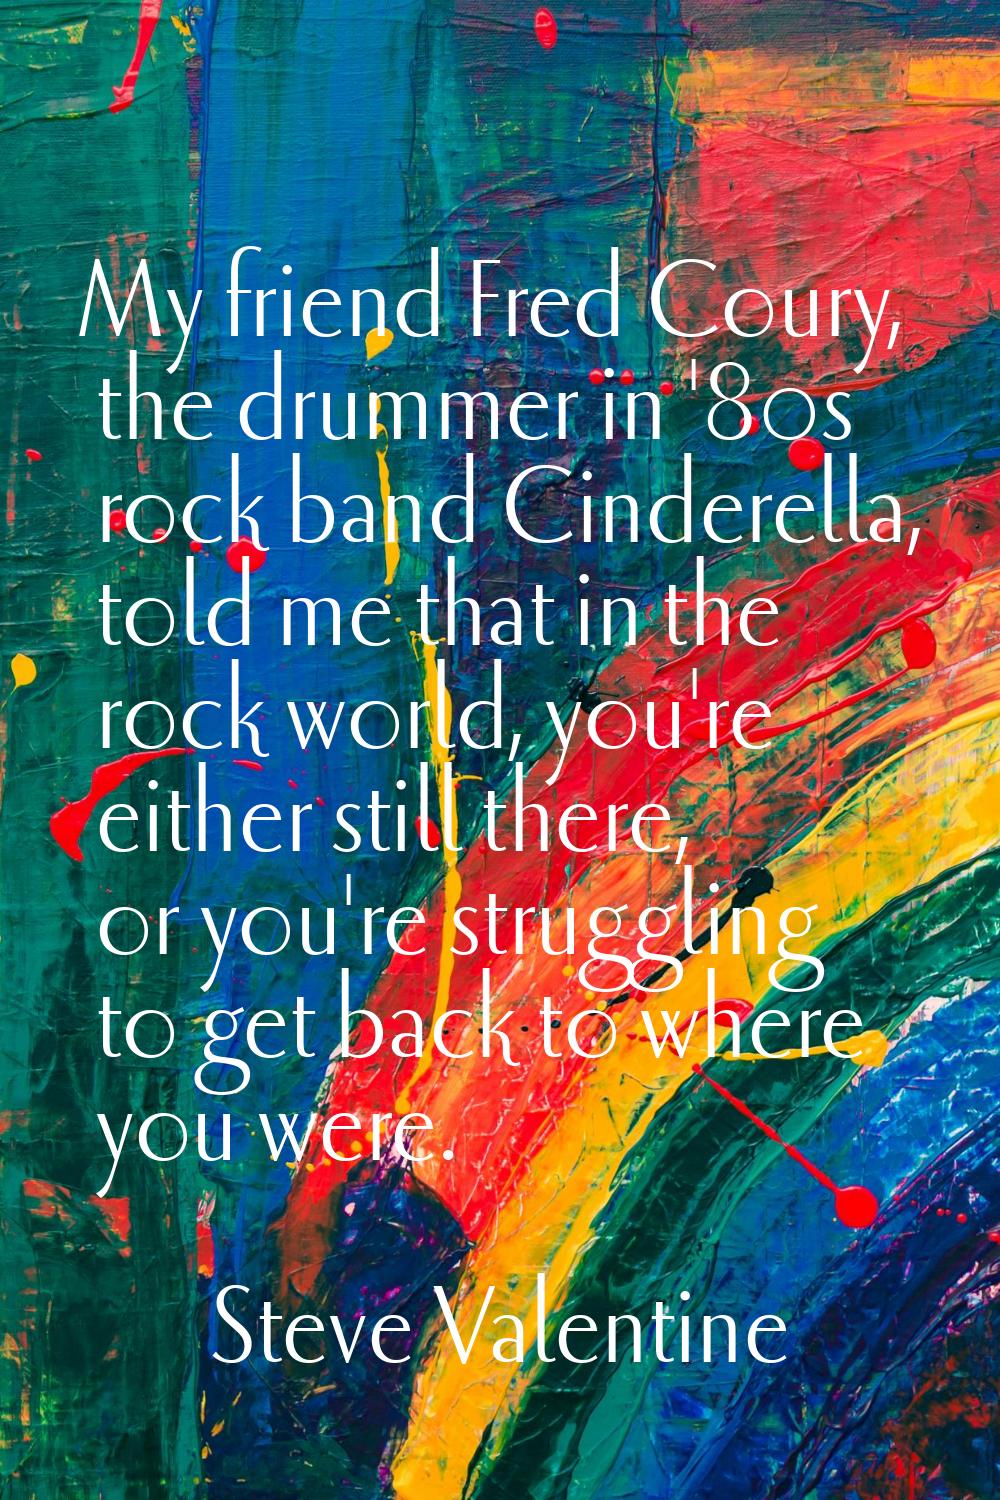 My friend Fred Coury, the drummer in '80s rock band Cinderella, told me that in the rock world, you